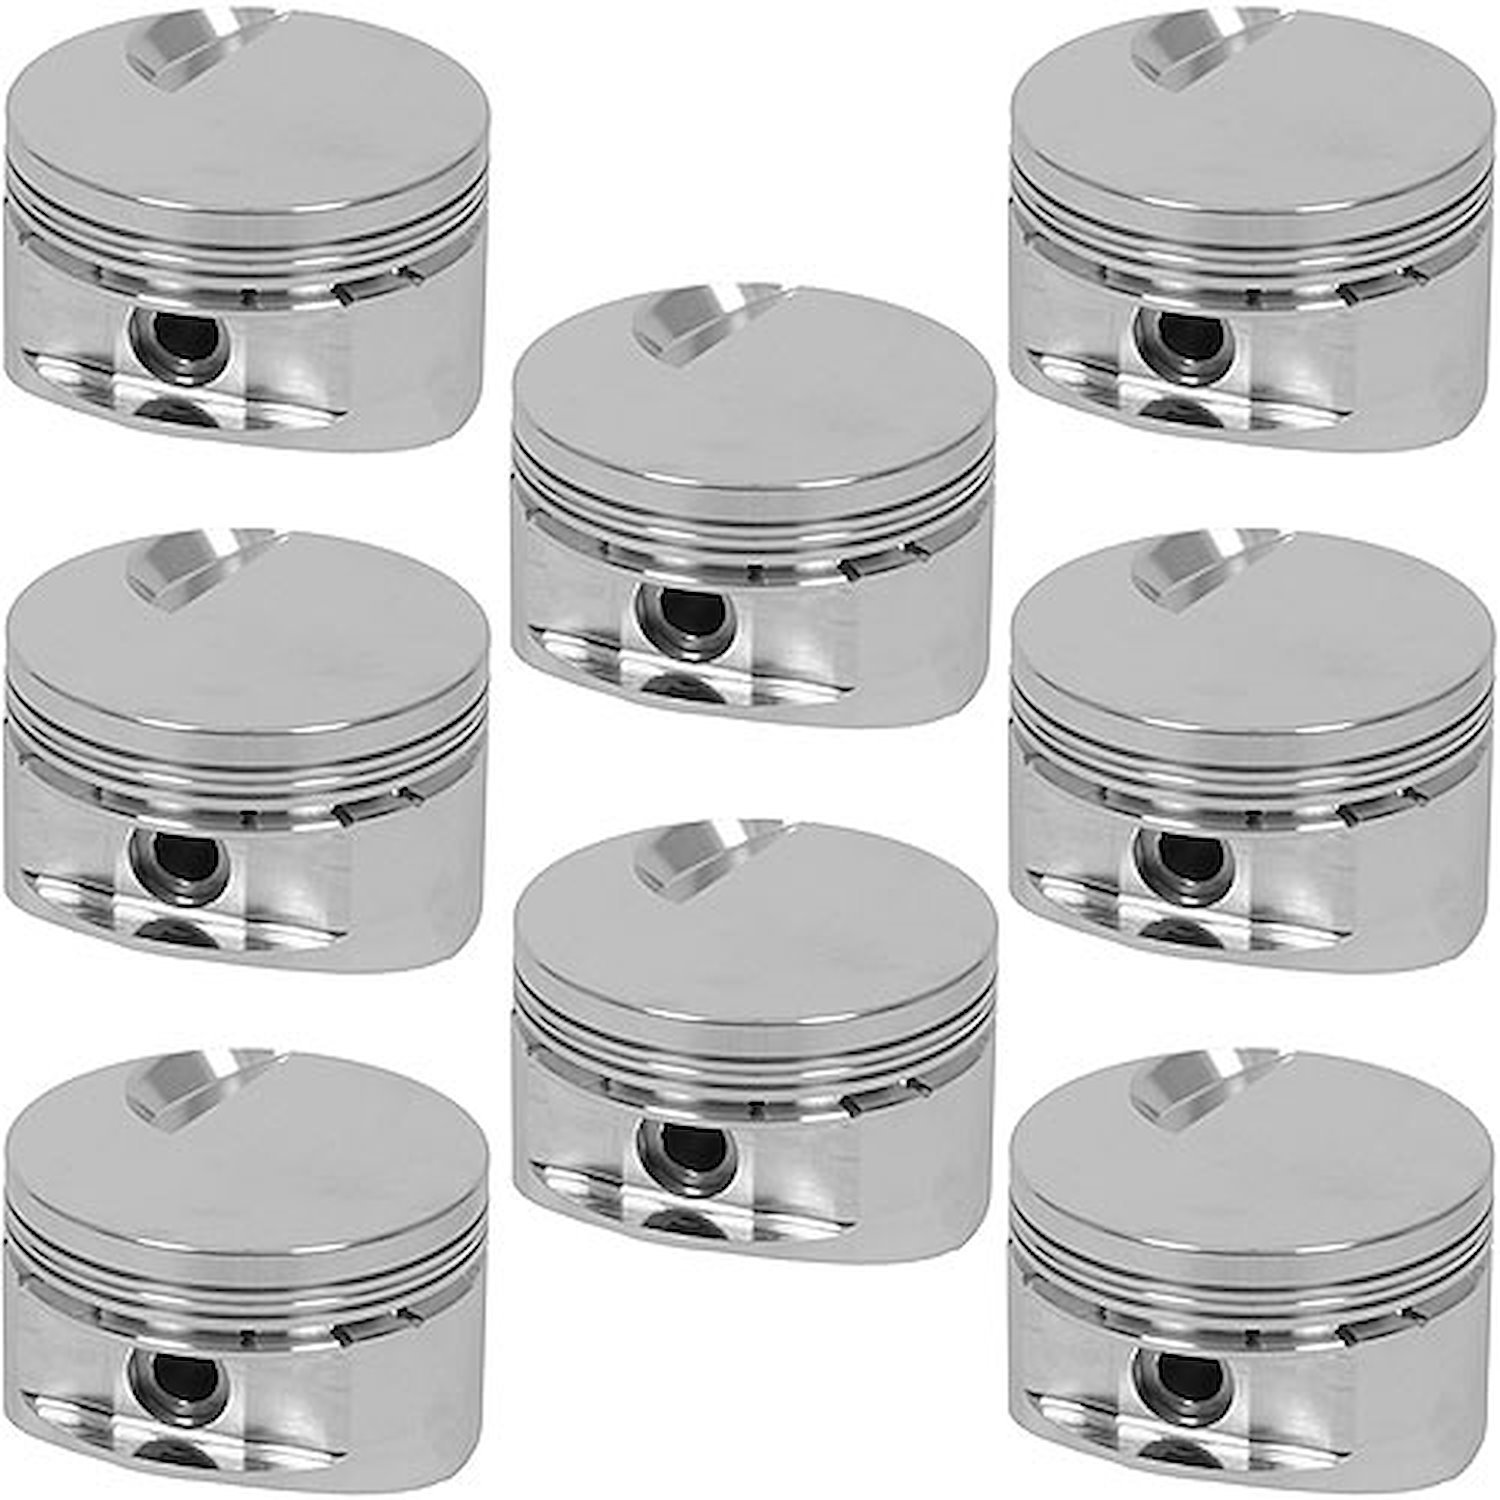 BB-Chevy Flat Top Pistons 4.560" Bore (+.060" )